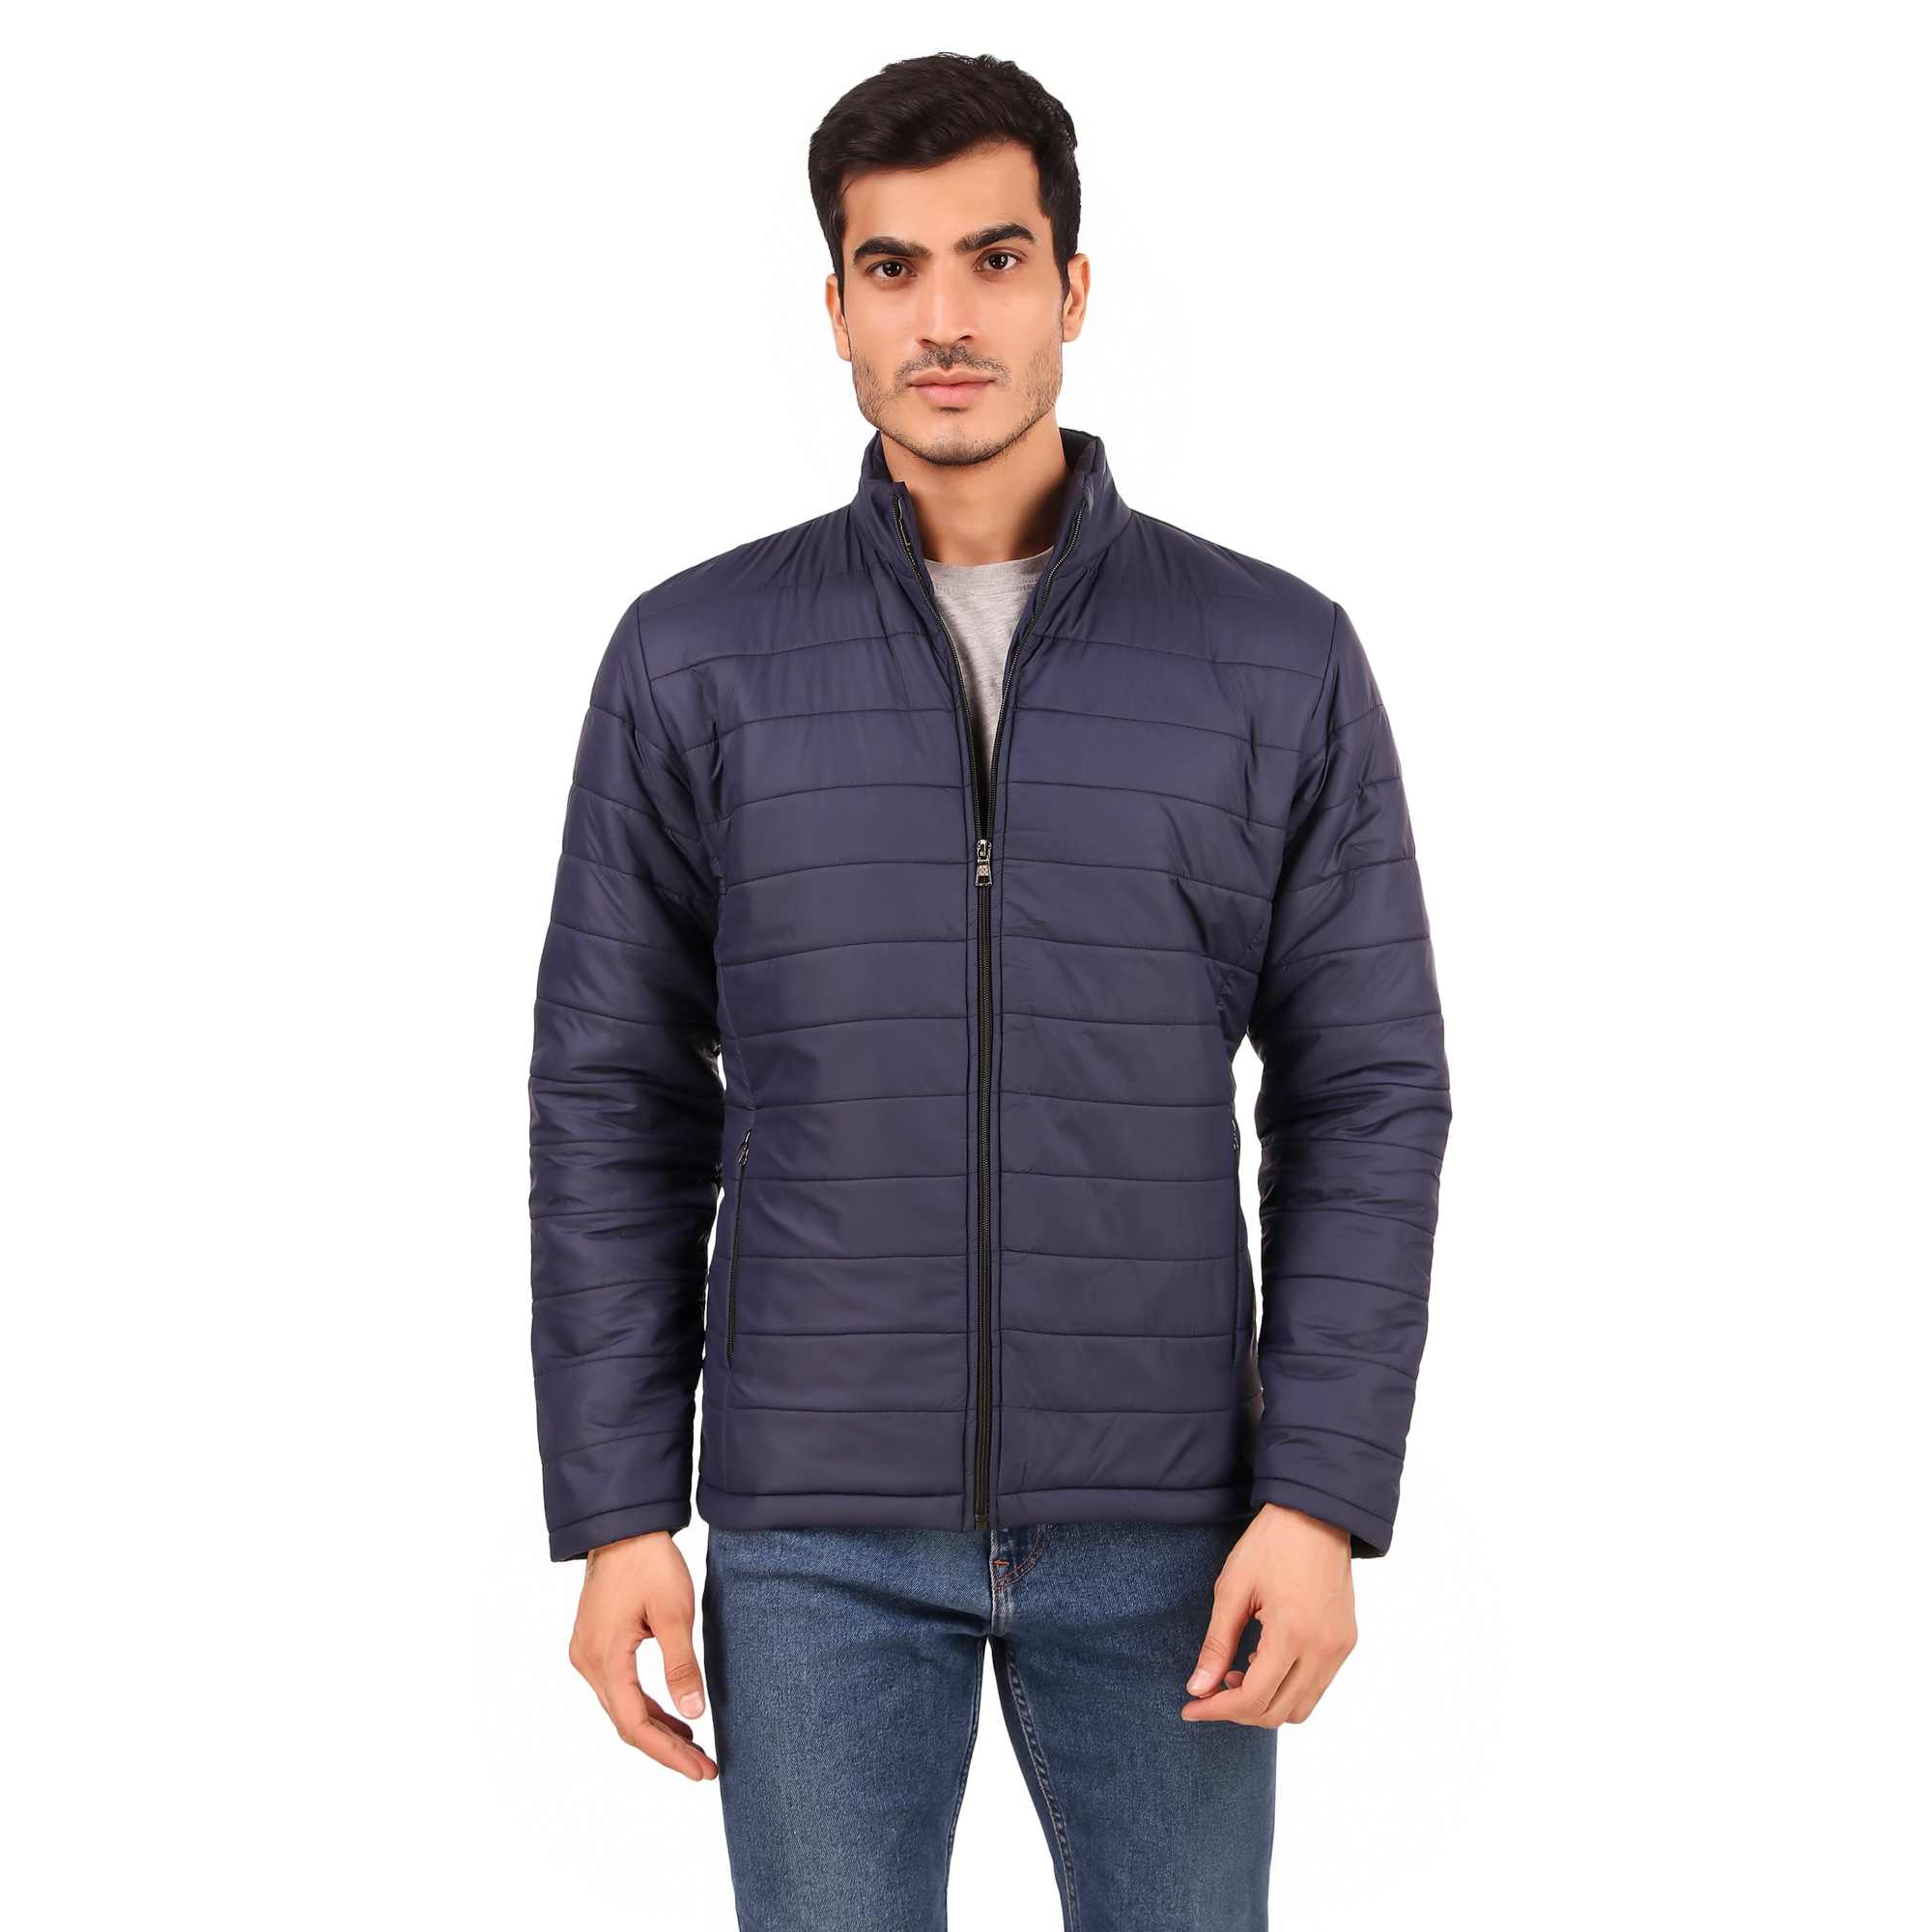 Buy Mens Polyester Regular Fit Jacket Online @ ₹1499 from ShopClues